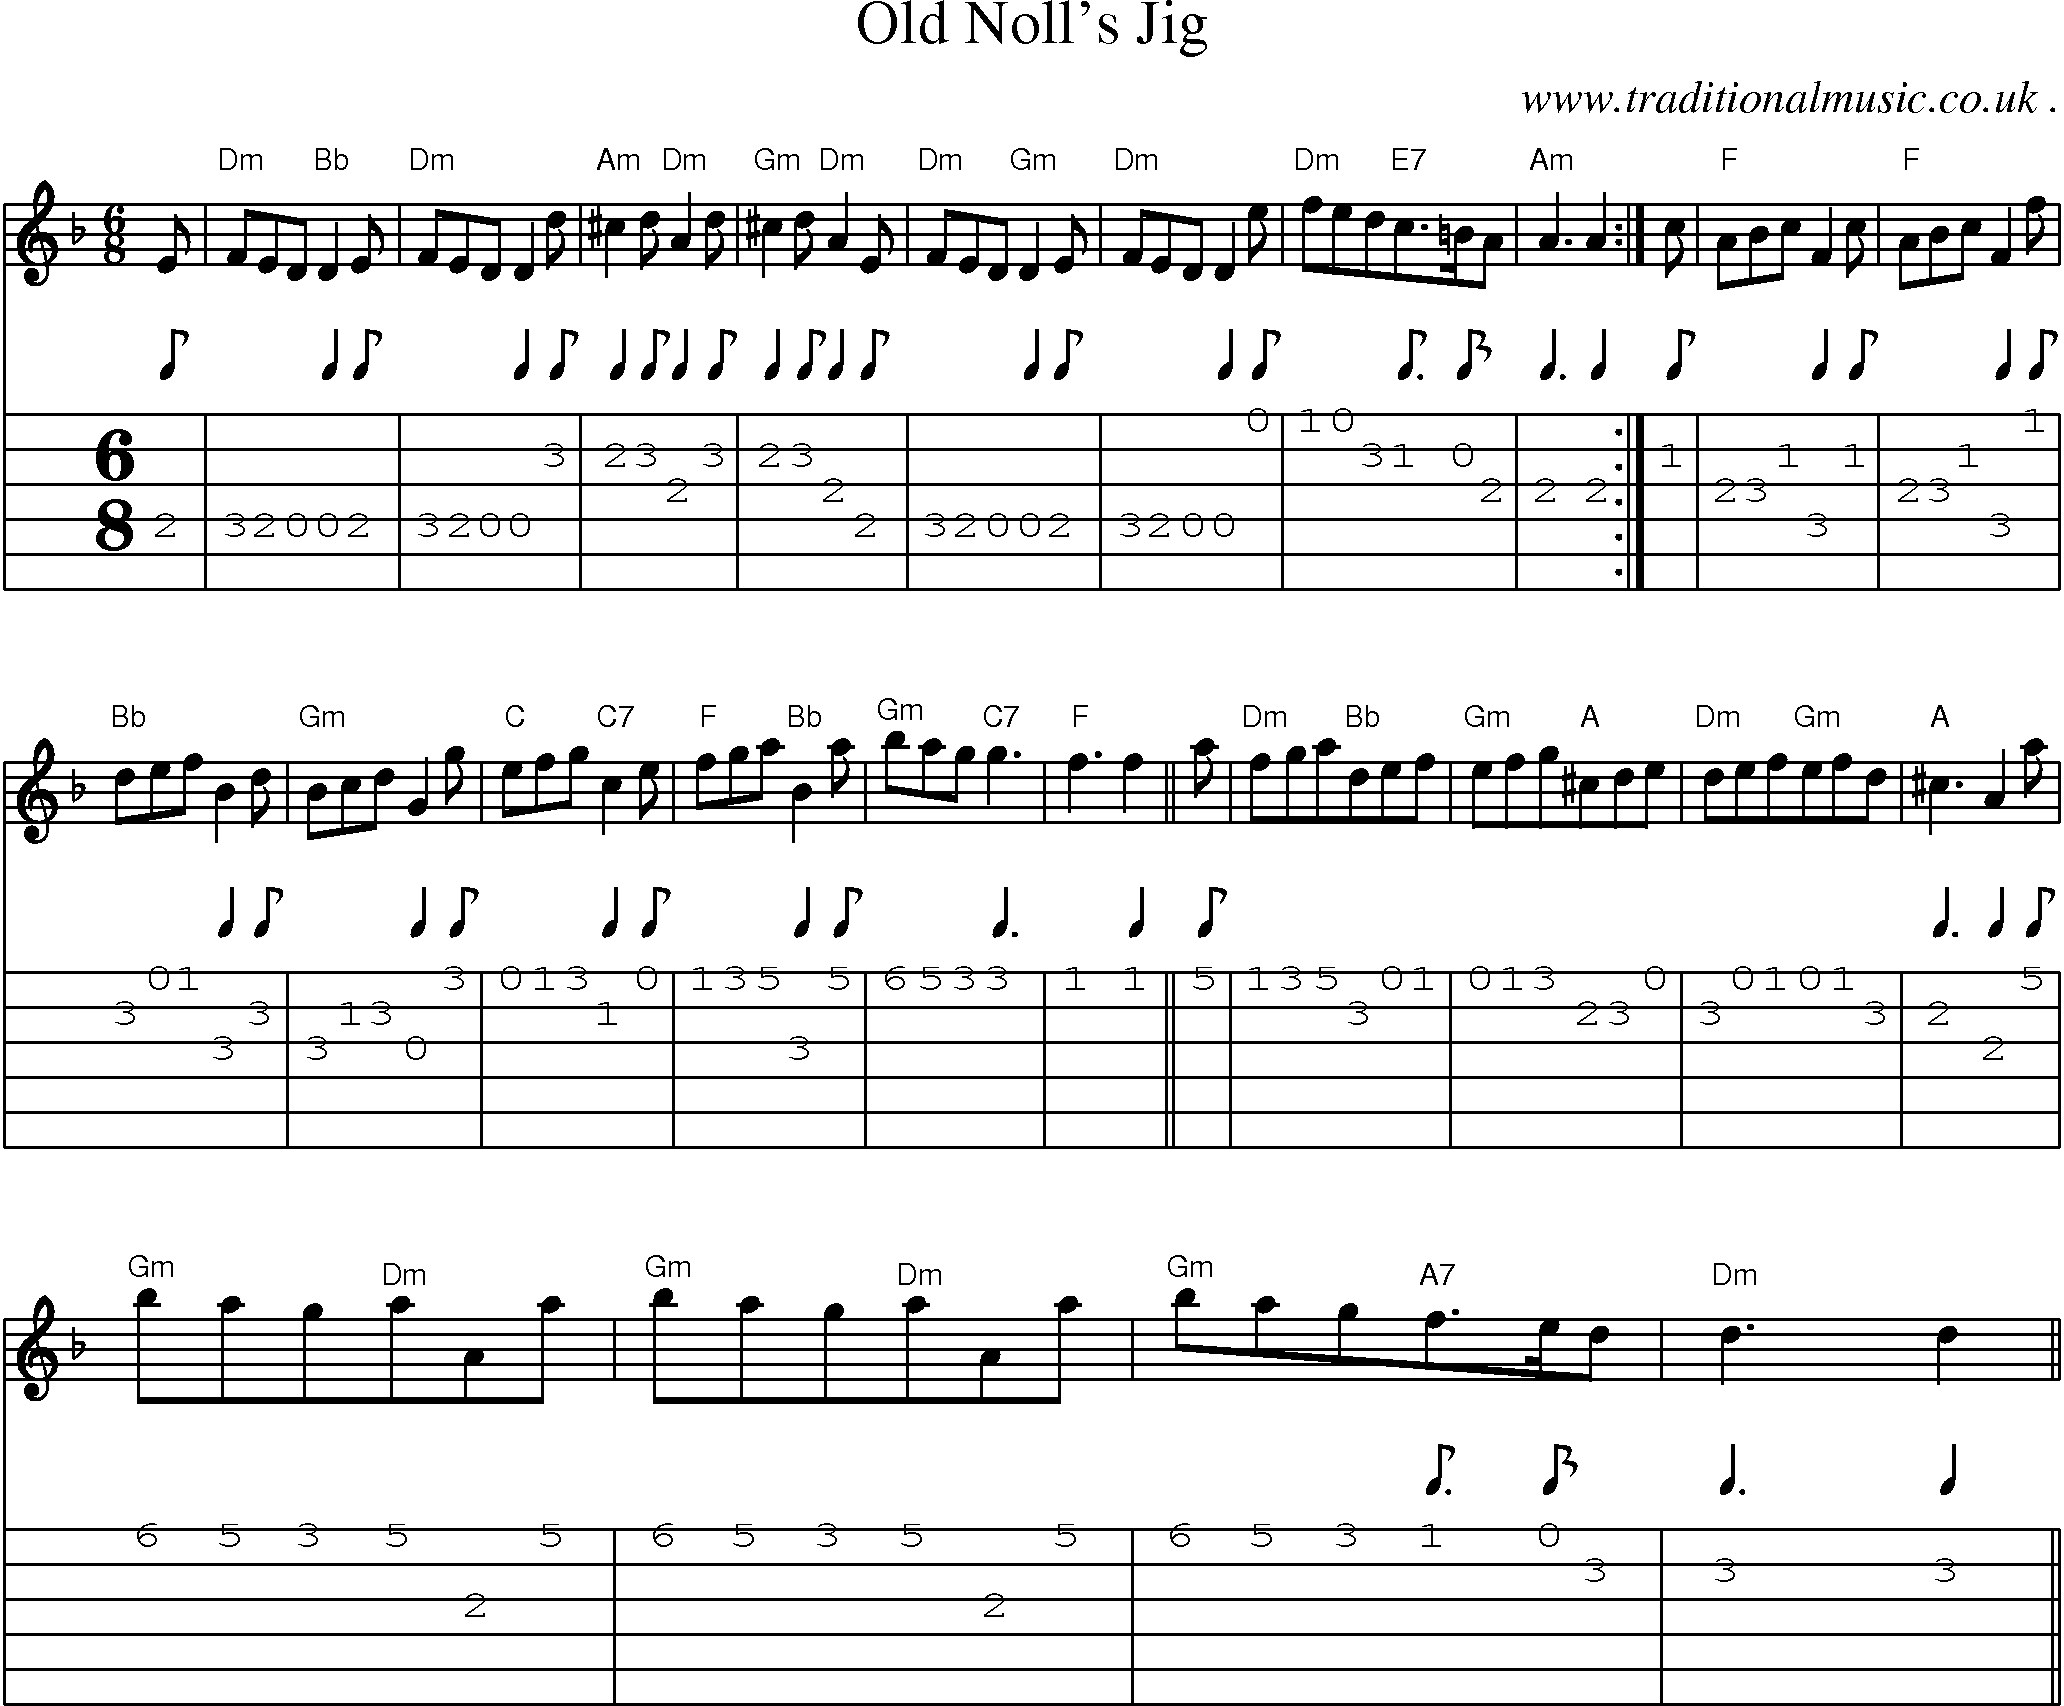 Sheet-Music and Guitar Tabs for Old Nolls Jig